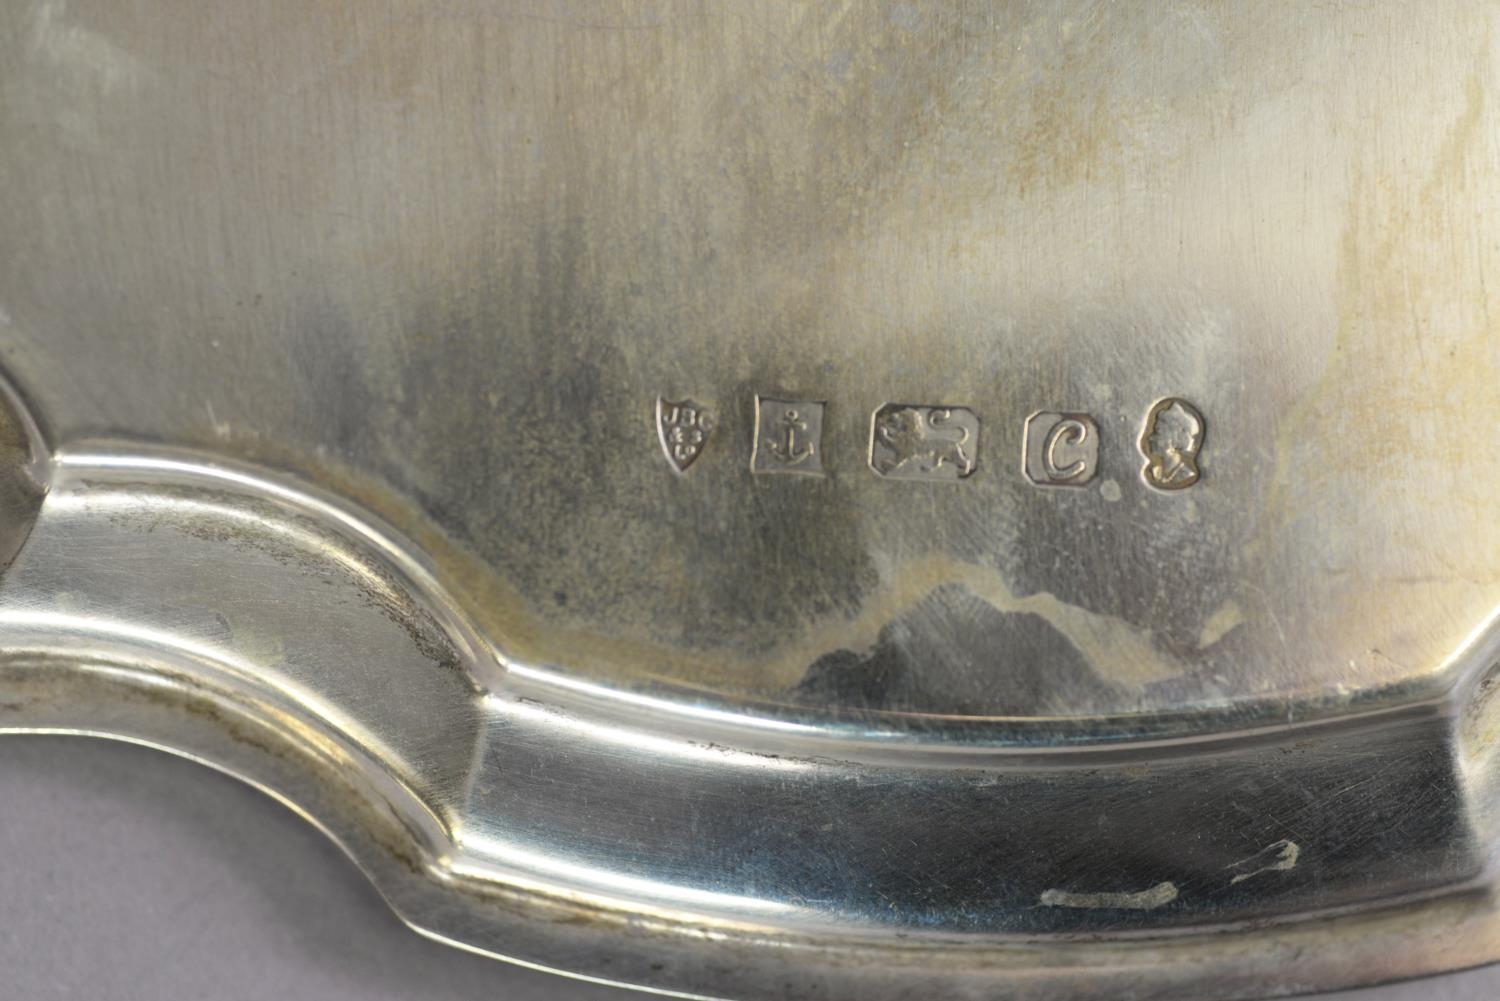 GEORGIAN STYLE SILVER SALVER, with plain centre, moulded border and volute scroll feet, 10” (25.4cm) - Image 2 of 2